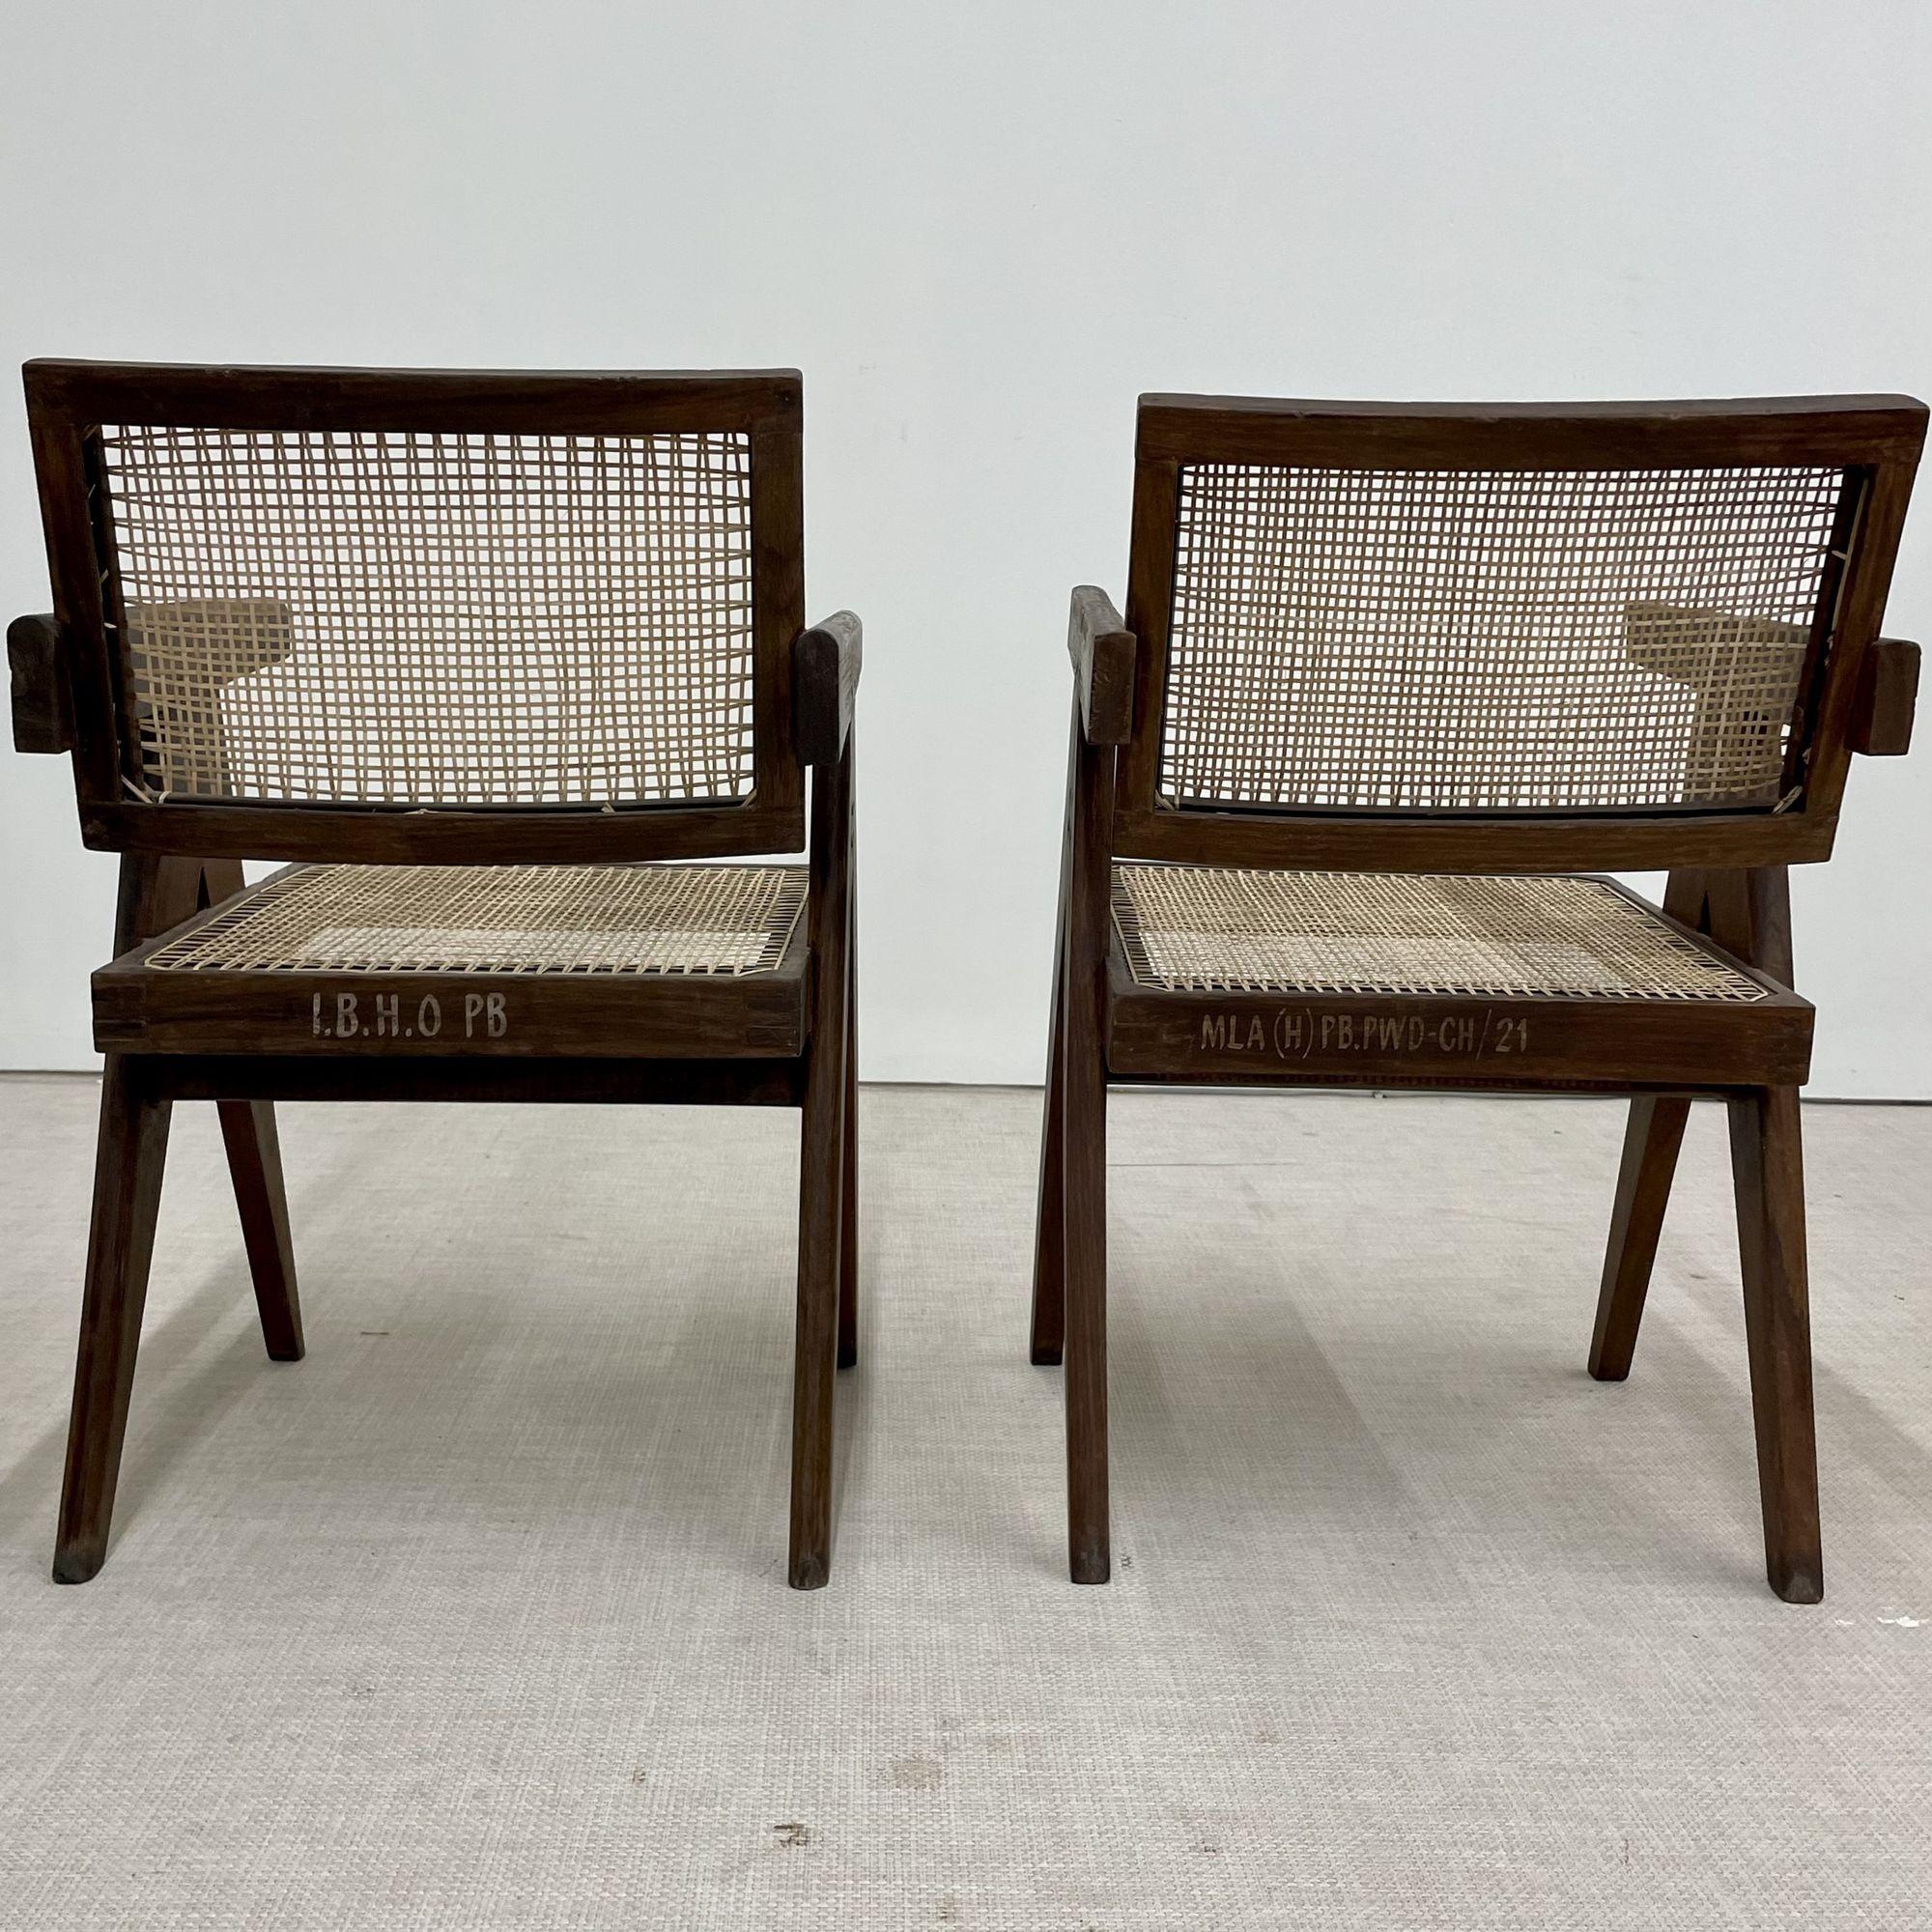 Four Authentic Pierre Jeanneret Floating Back Arm Chairs, Mid-Century Modern 1